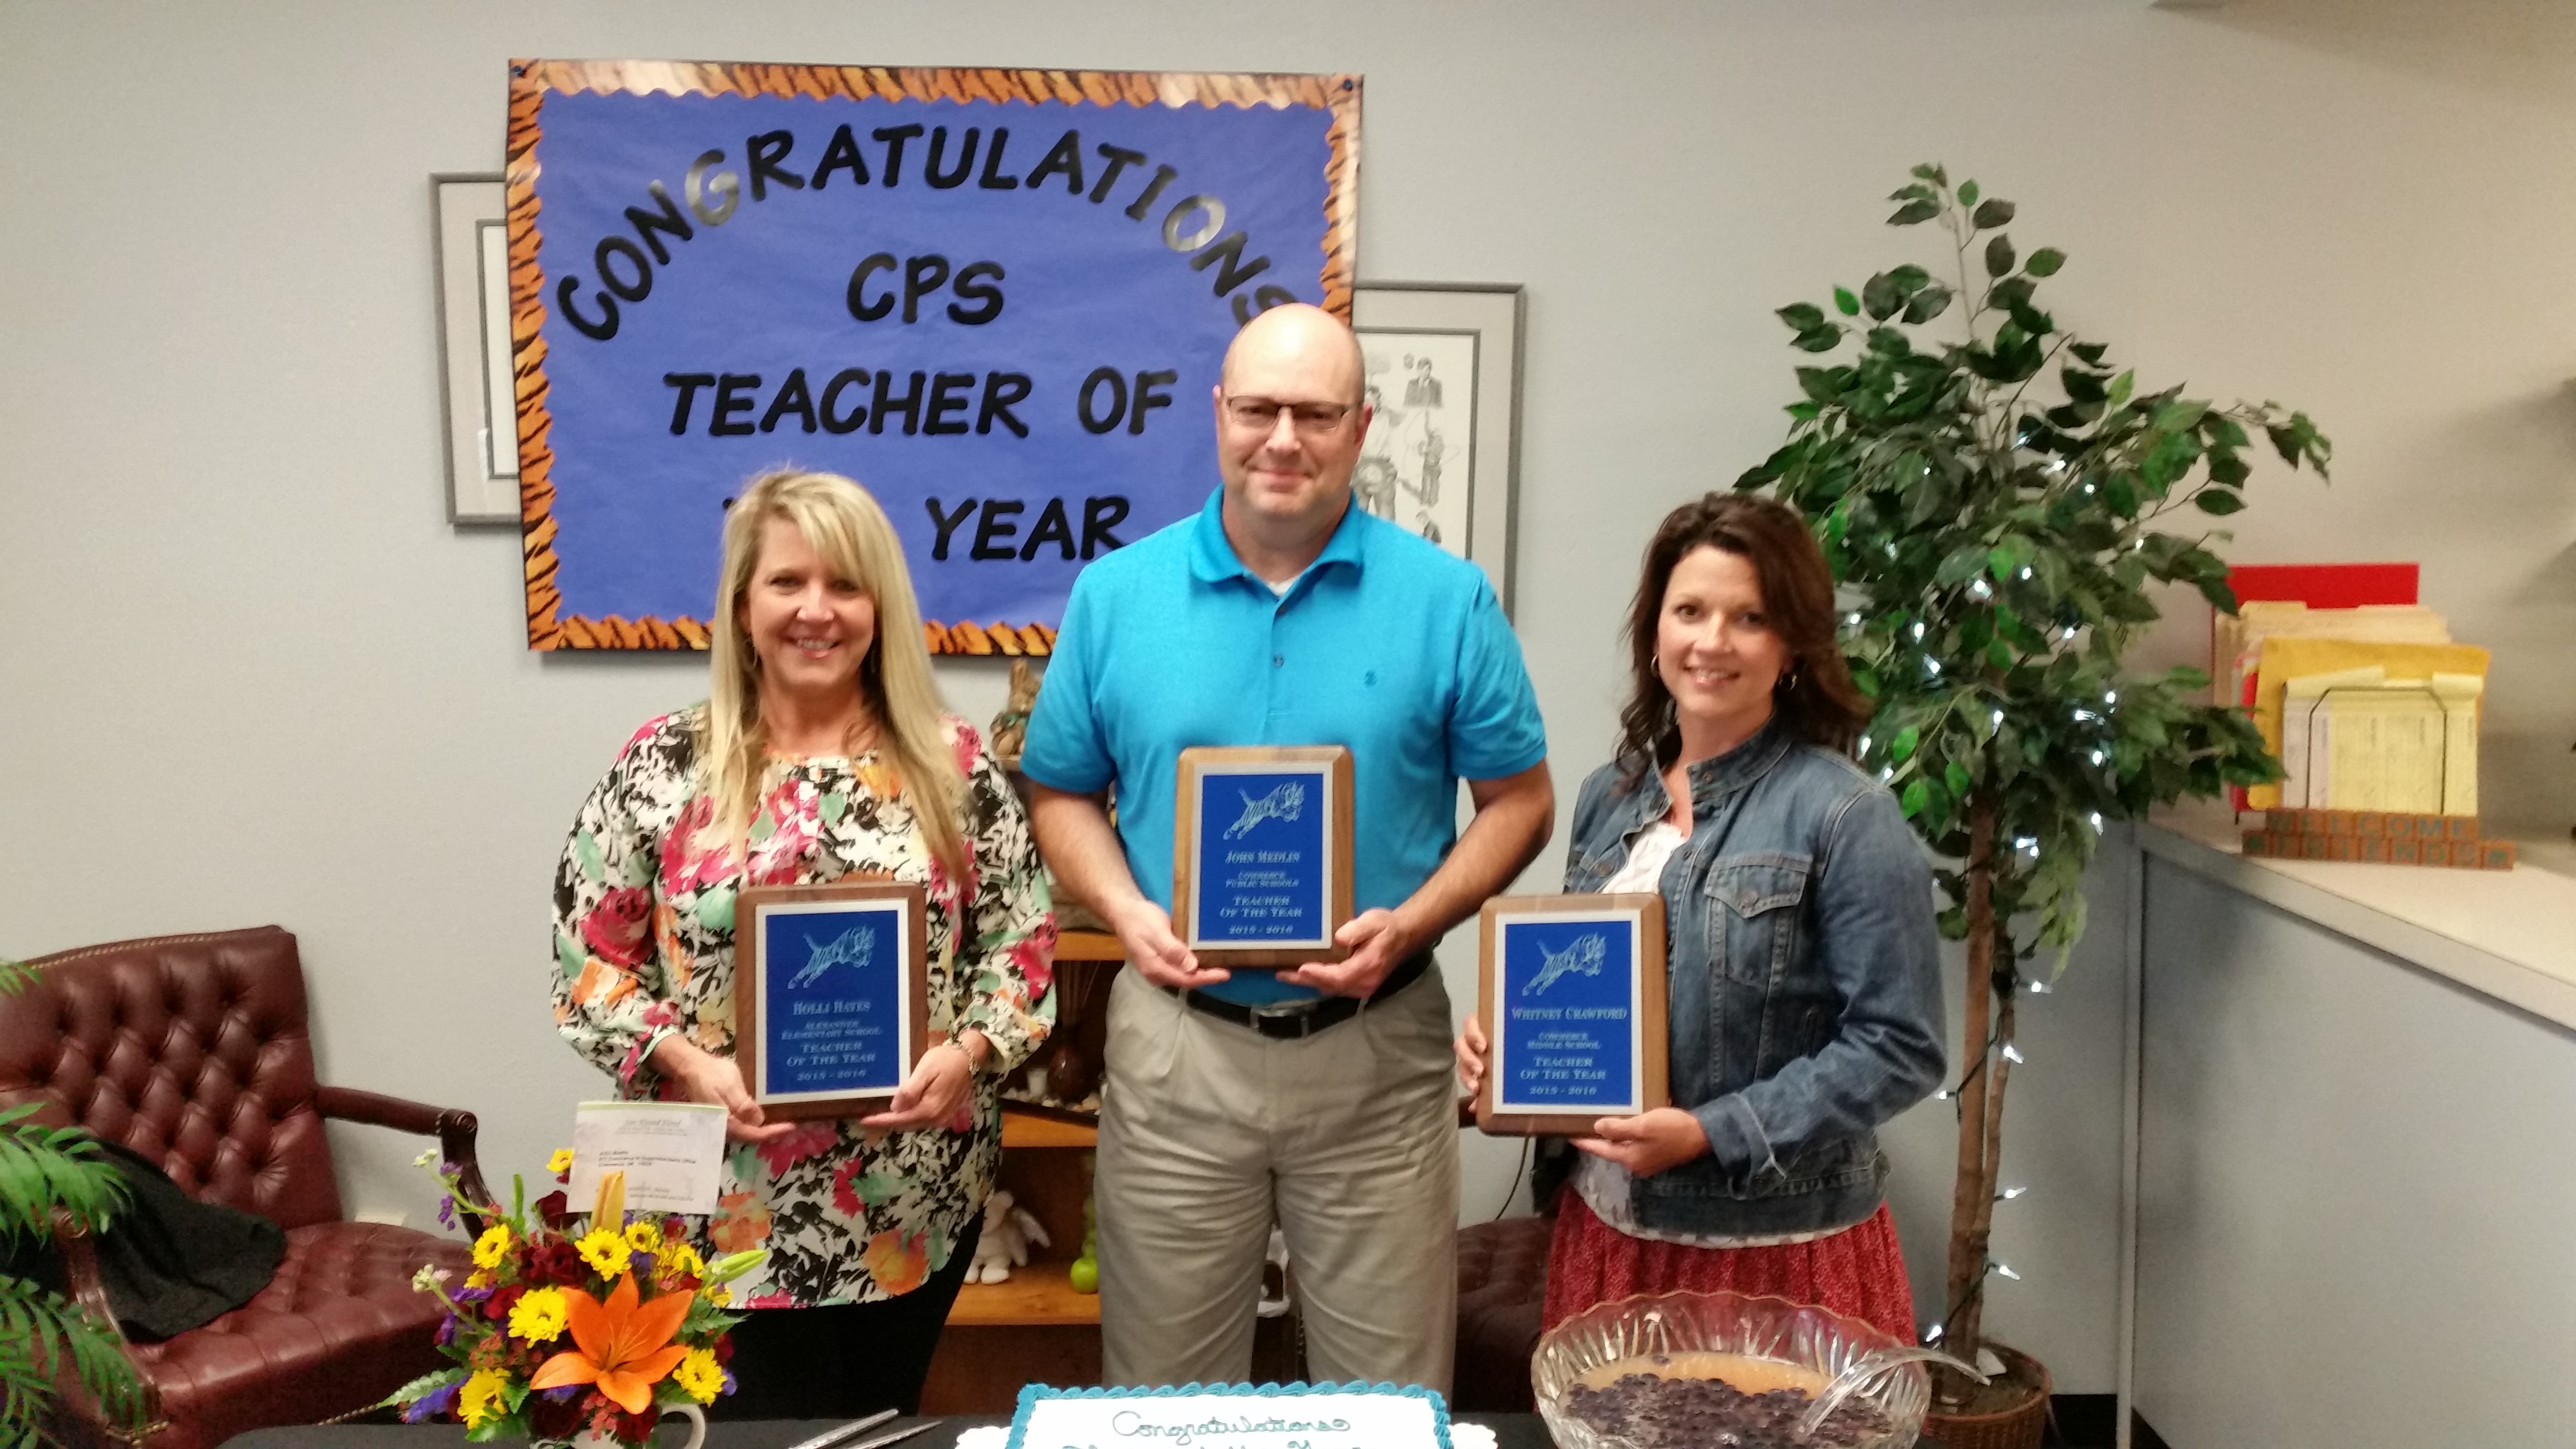 2015-2016 Left to Right: Holli Hayes - AES, John Medlin - CHS & CPS, Whitney Crawford - CMS